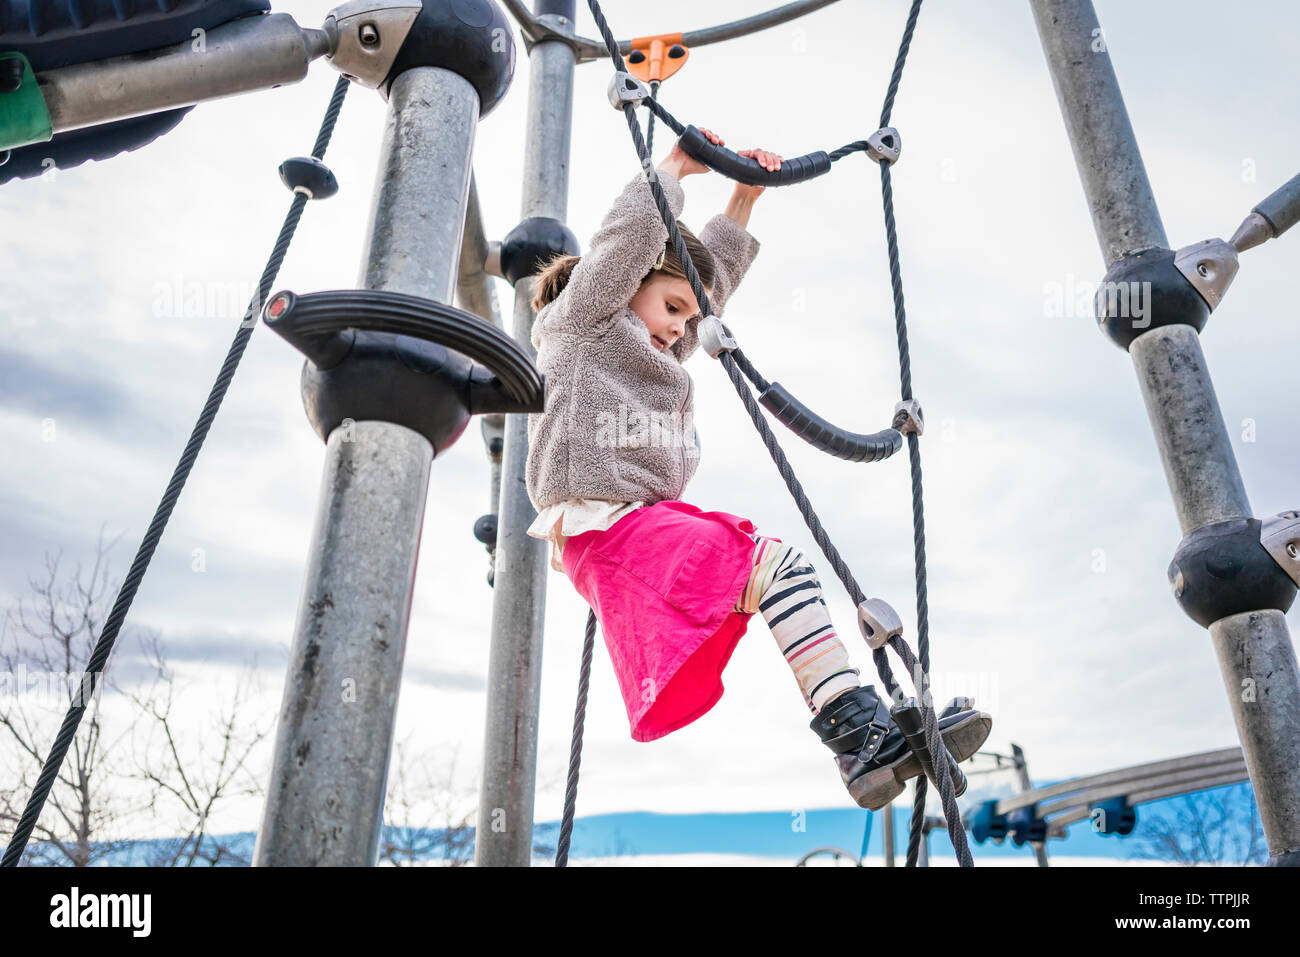 Low angle view of girl climbing on rope against cloudy sky at playground Stock Photo